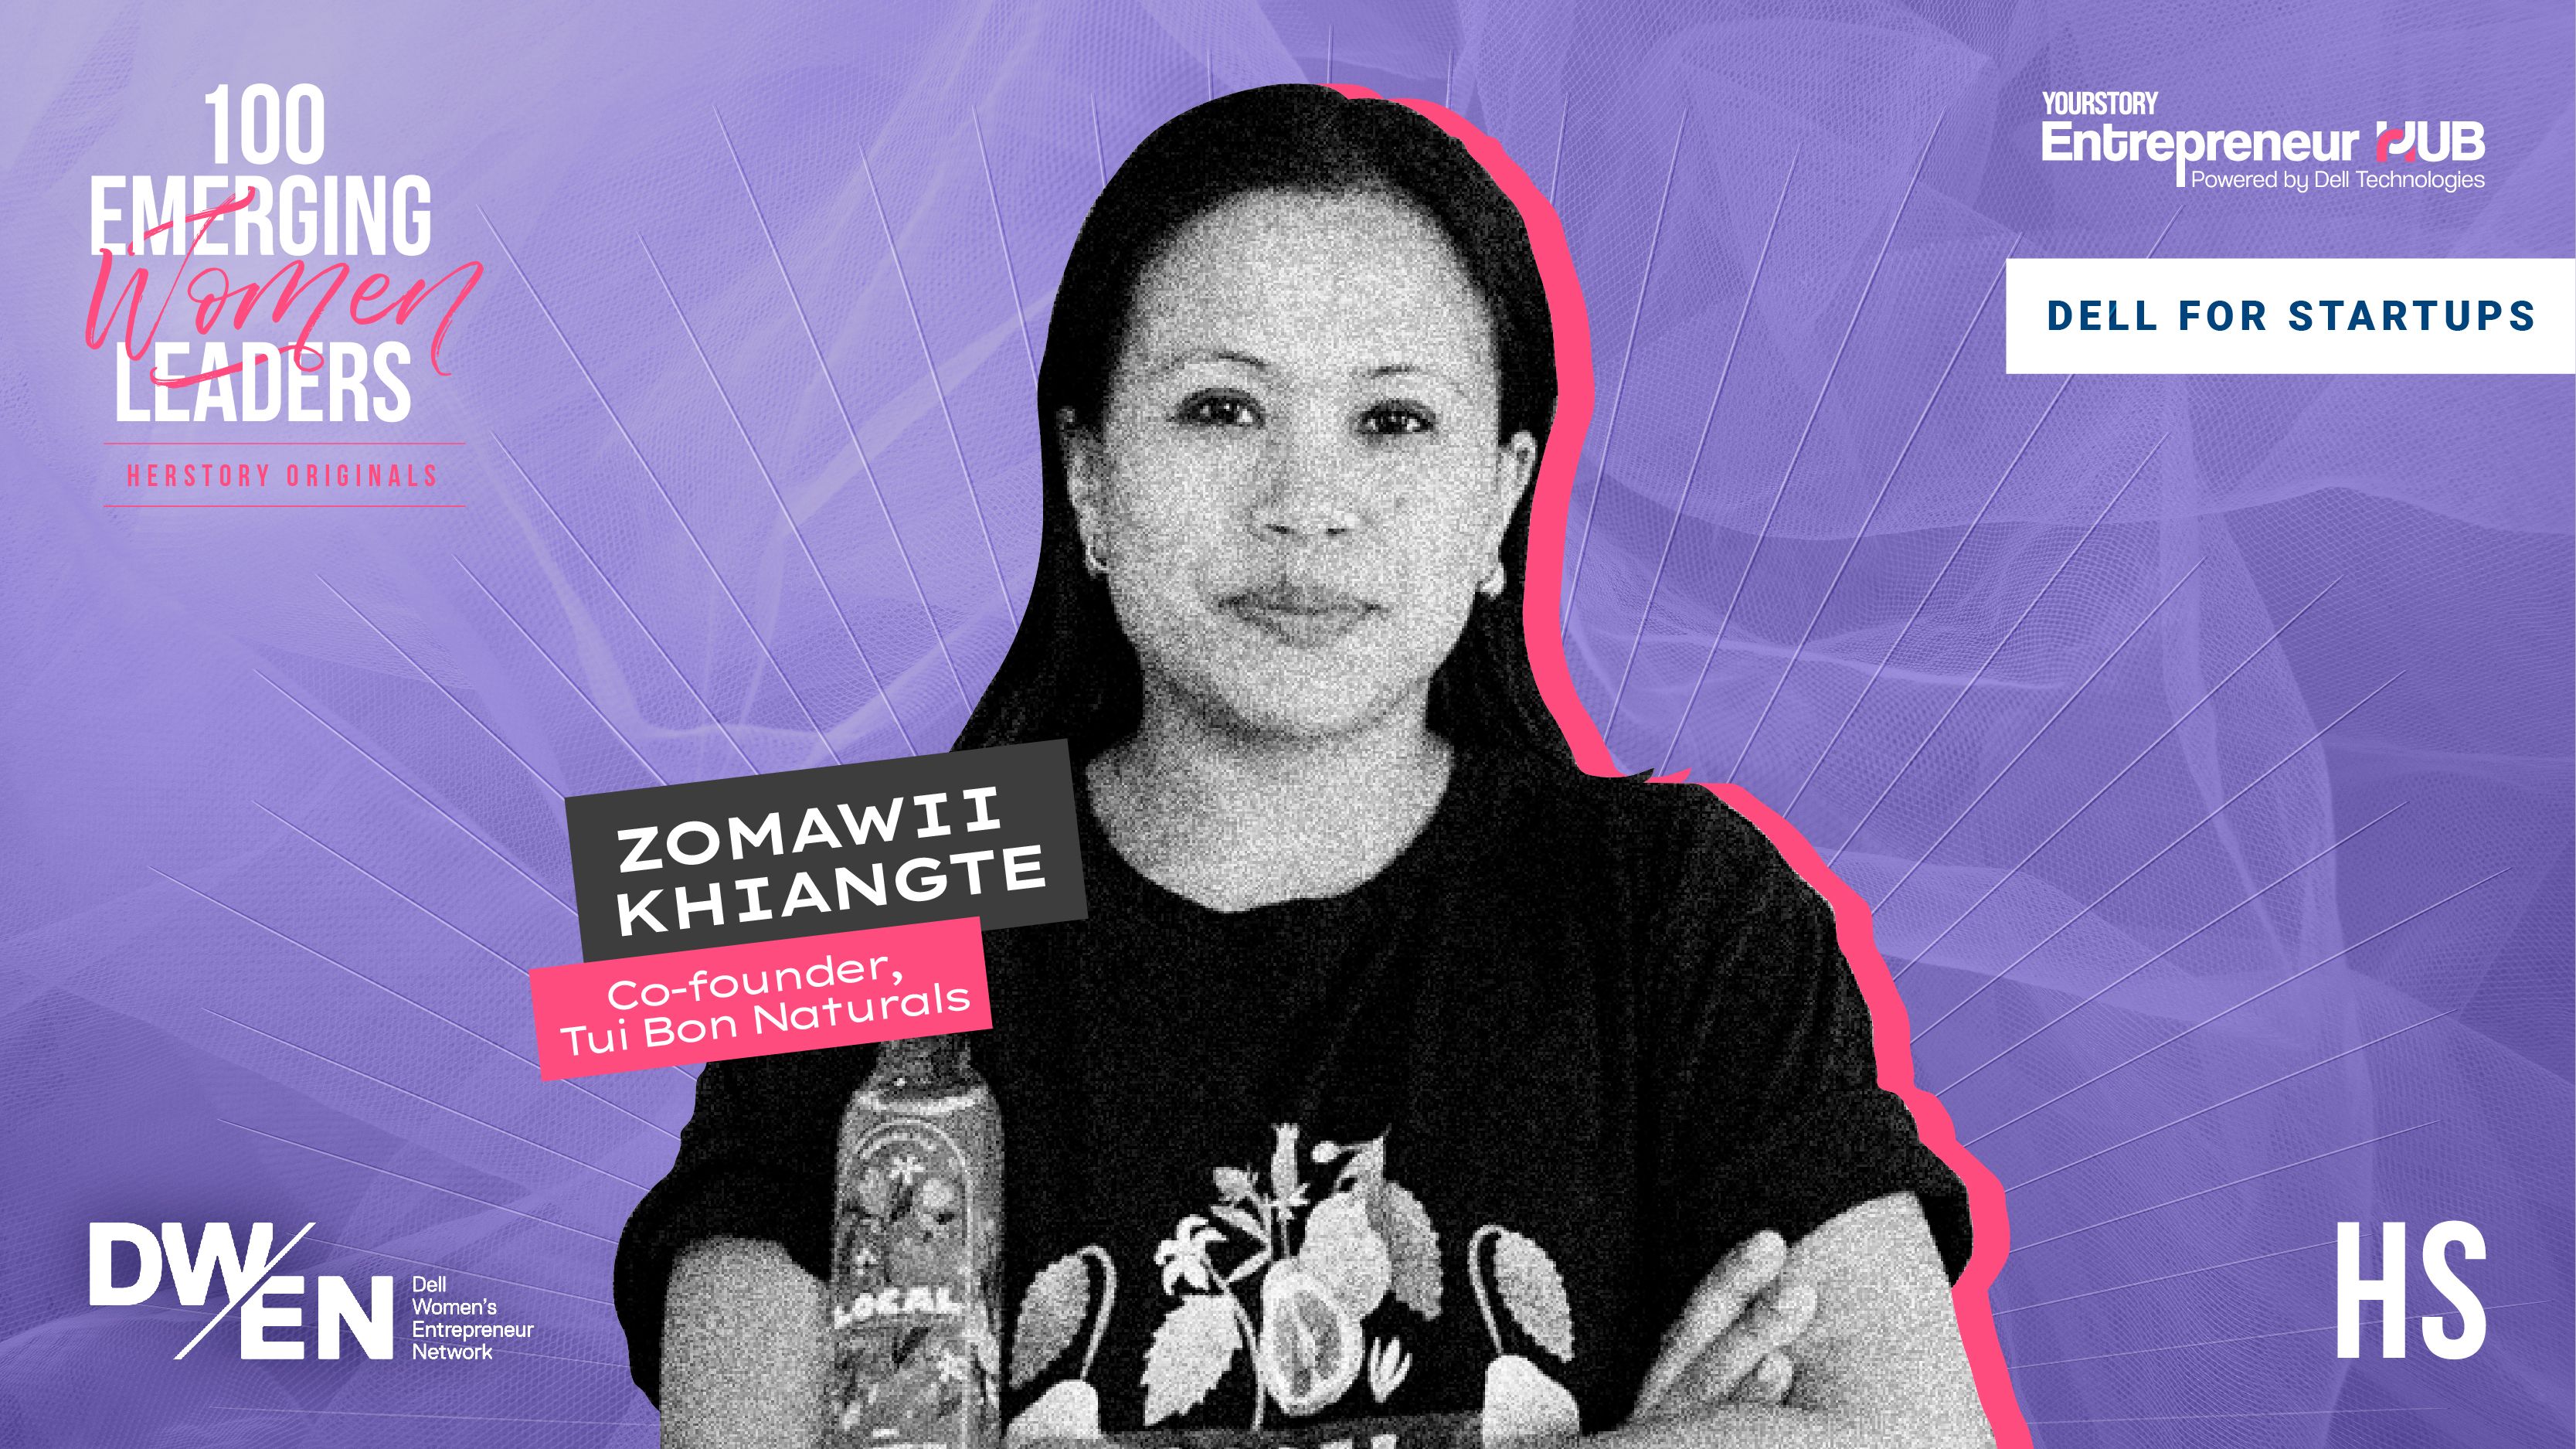 [100 Emerging Women Leaders] This Mizo entrepreneur’s farm-to-bottle startup offers craft sodas with flavours of the Northeast